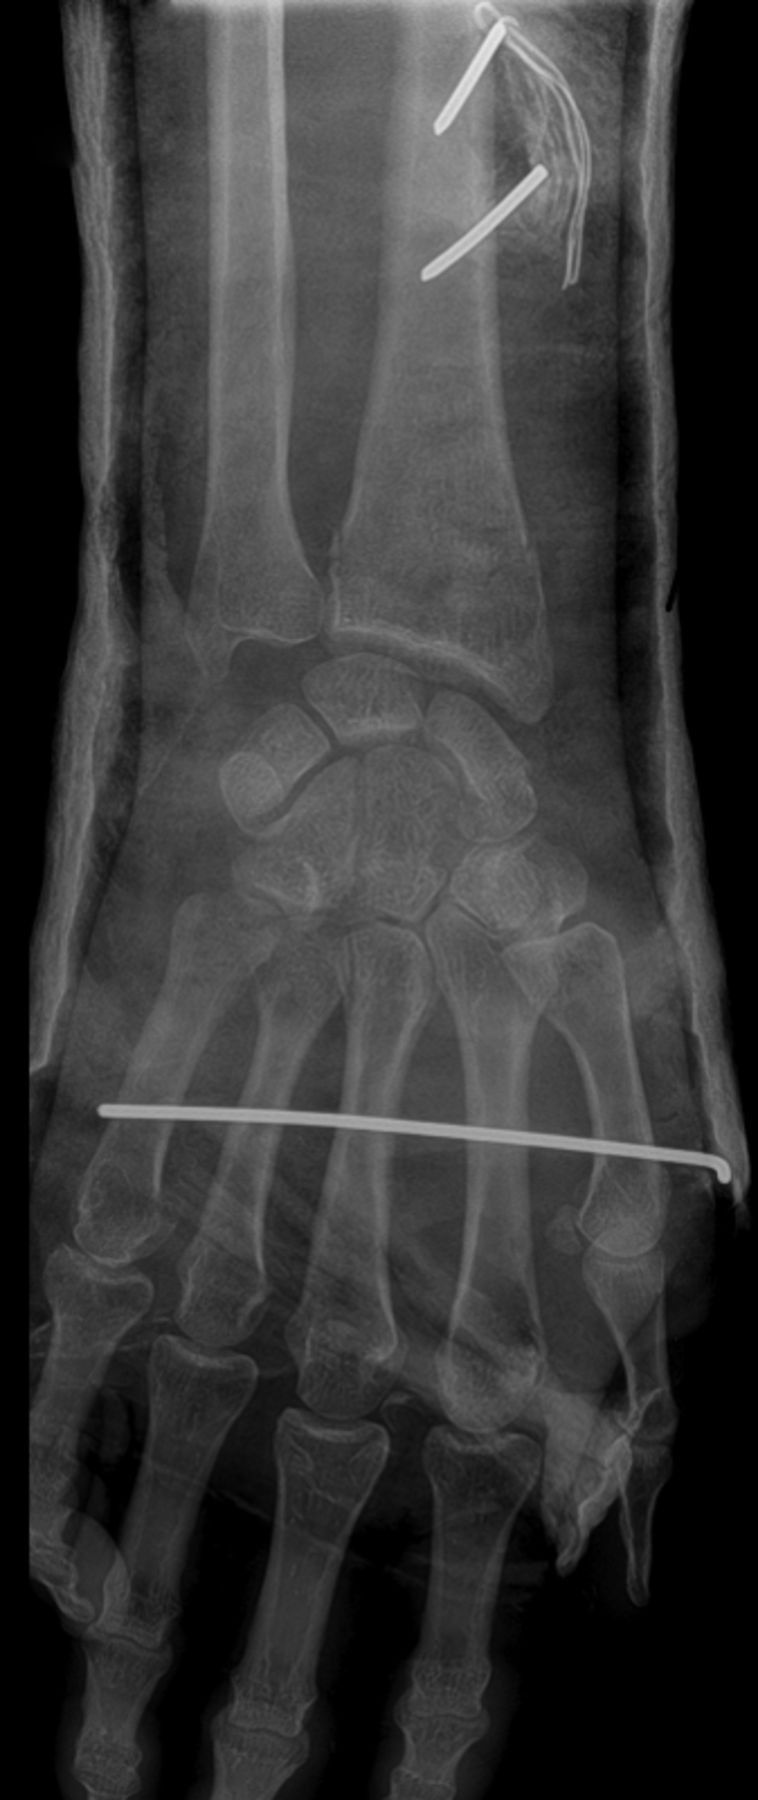 Figs. 1a - 1b 
            Radiographs showing a) an
anteroposterior view with two pins inserted proximal to the fracture
site, providing a buttress to maintain alignment. Another pin is
inserted in the second and third metacarpal bone, with the pin bent
at the radial side. The b) lateral view shows pins which engaged
both cortices of the bone, and remained out of the skin
          